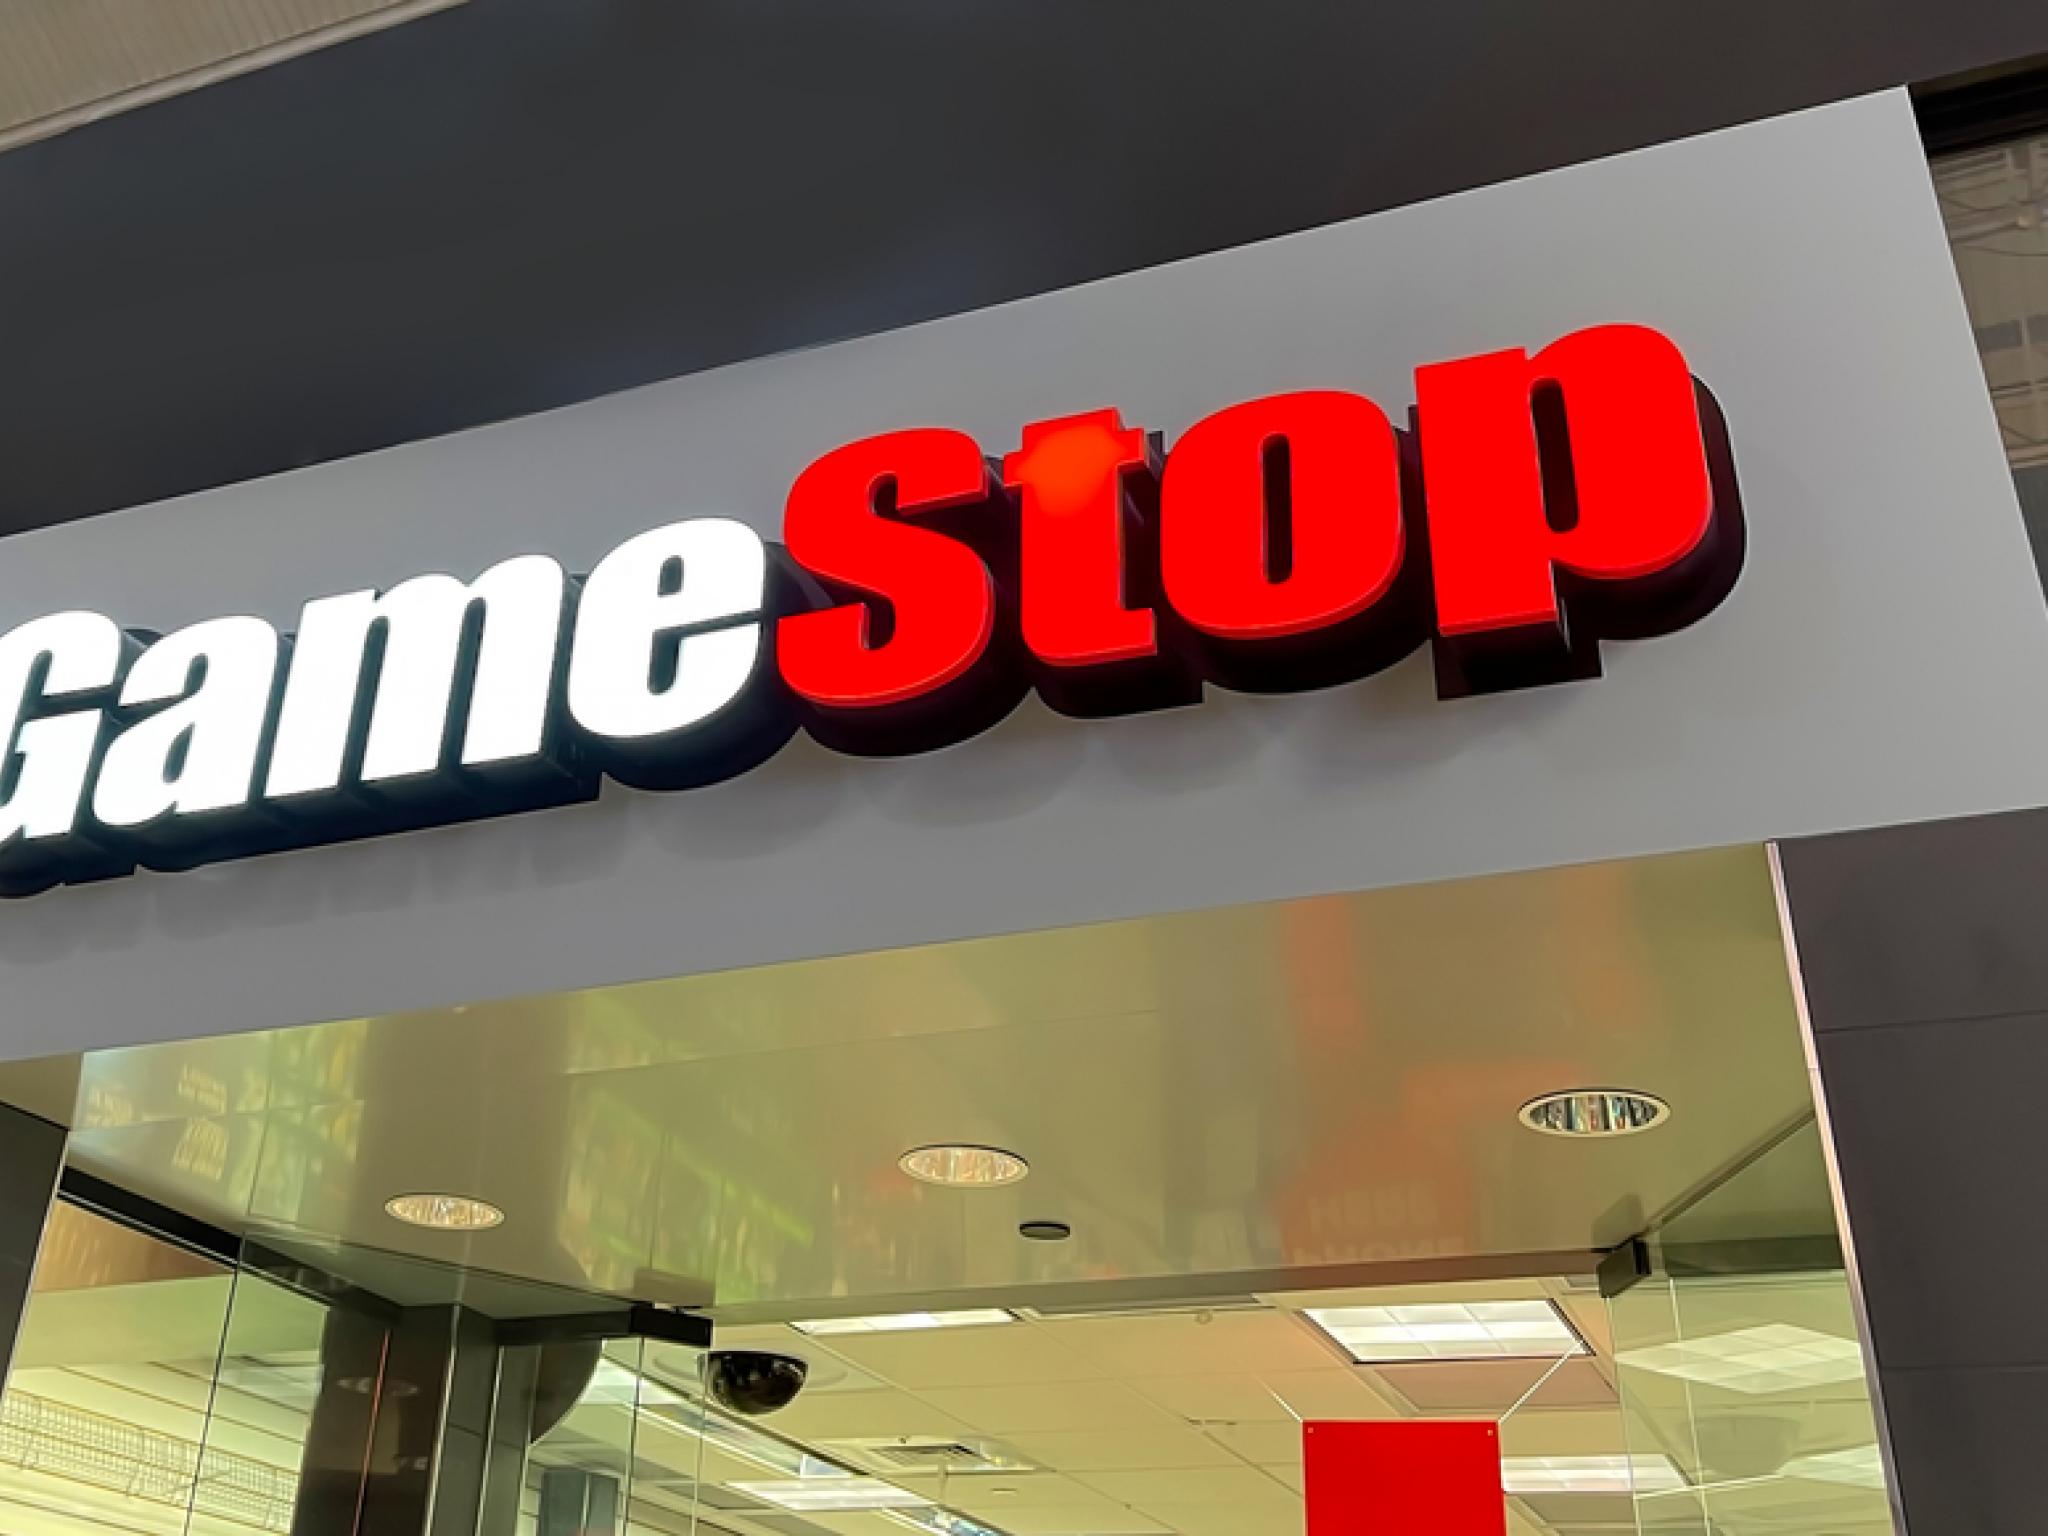  gamestop-squarespace-incyte-and-other-big-stocks-moving-higher-on-monday 